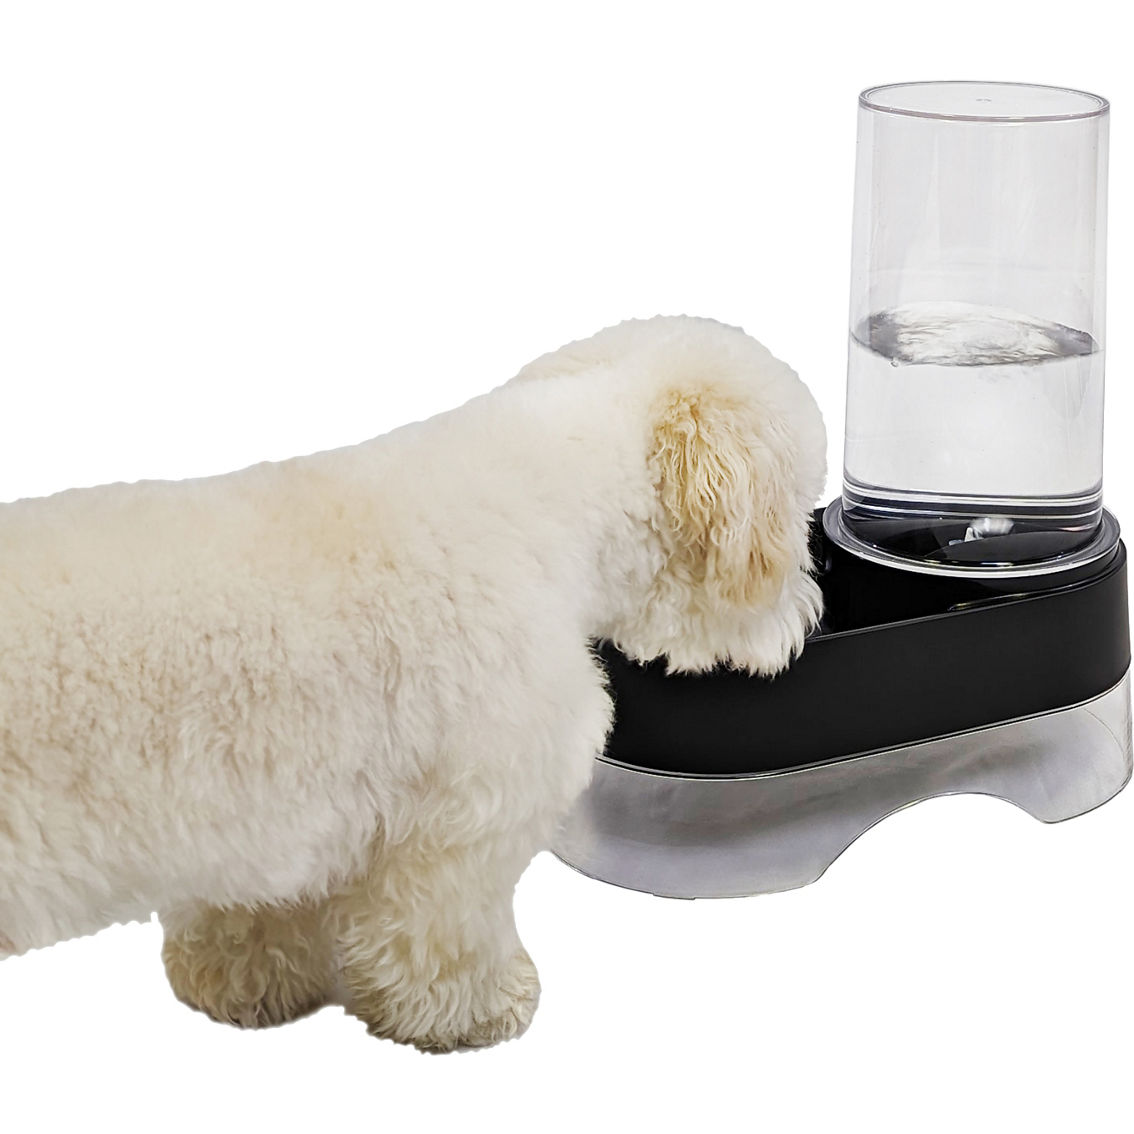 Richell Elevated Gravity Pet Water Dispenser - Image 7 of 8